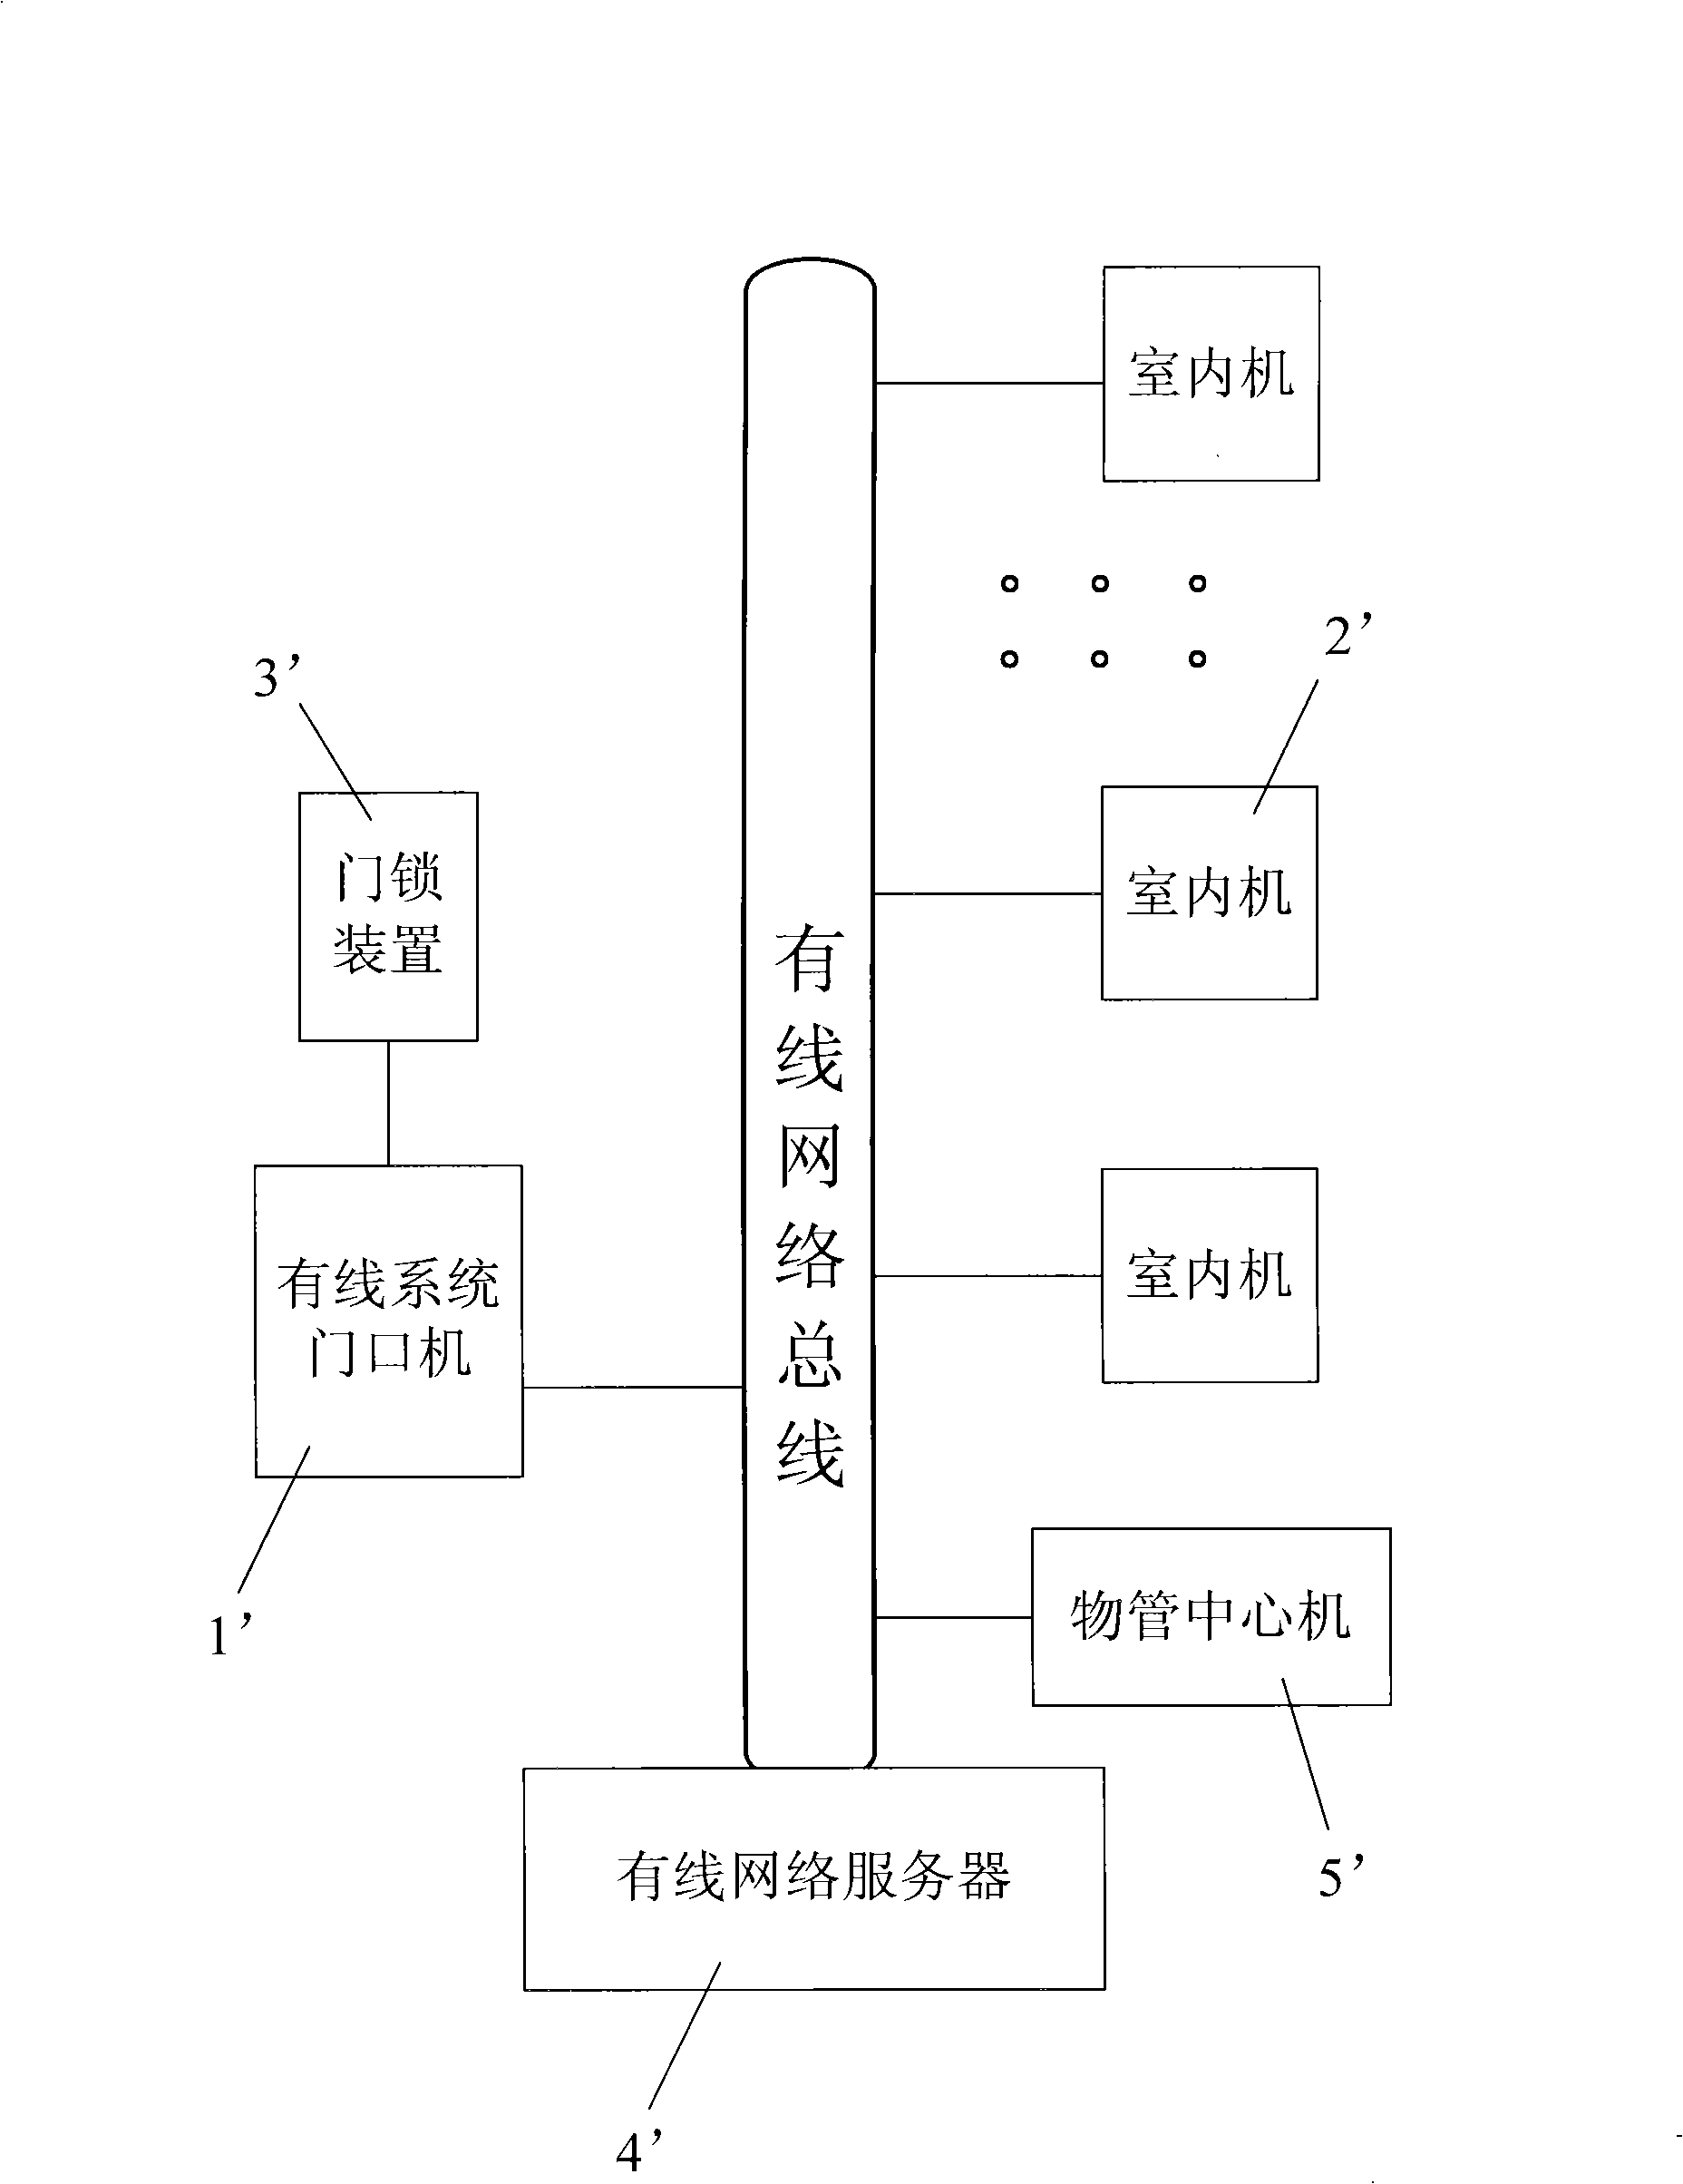 Building inter-communicator easy to maintain and entrance guard control method and system